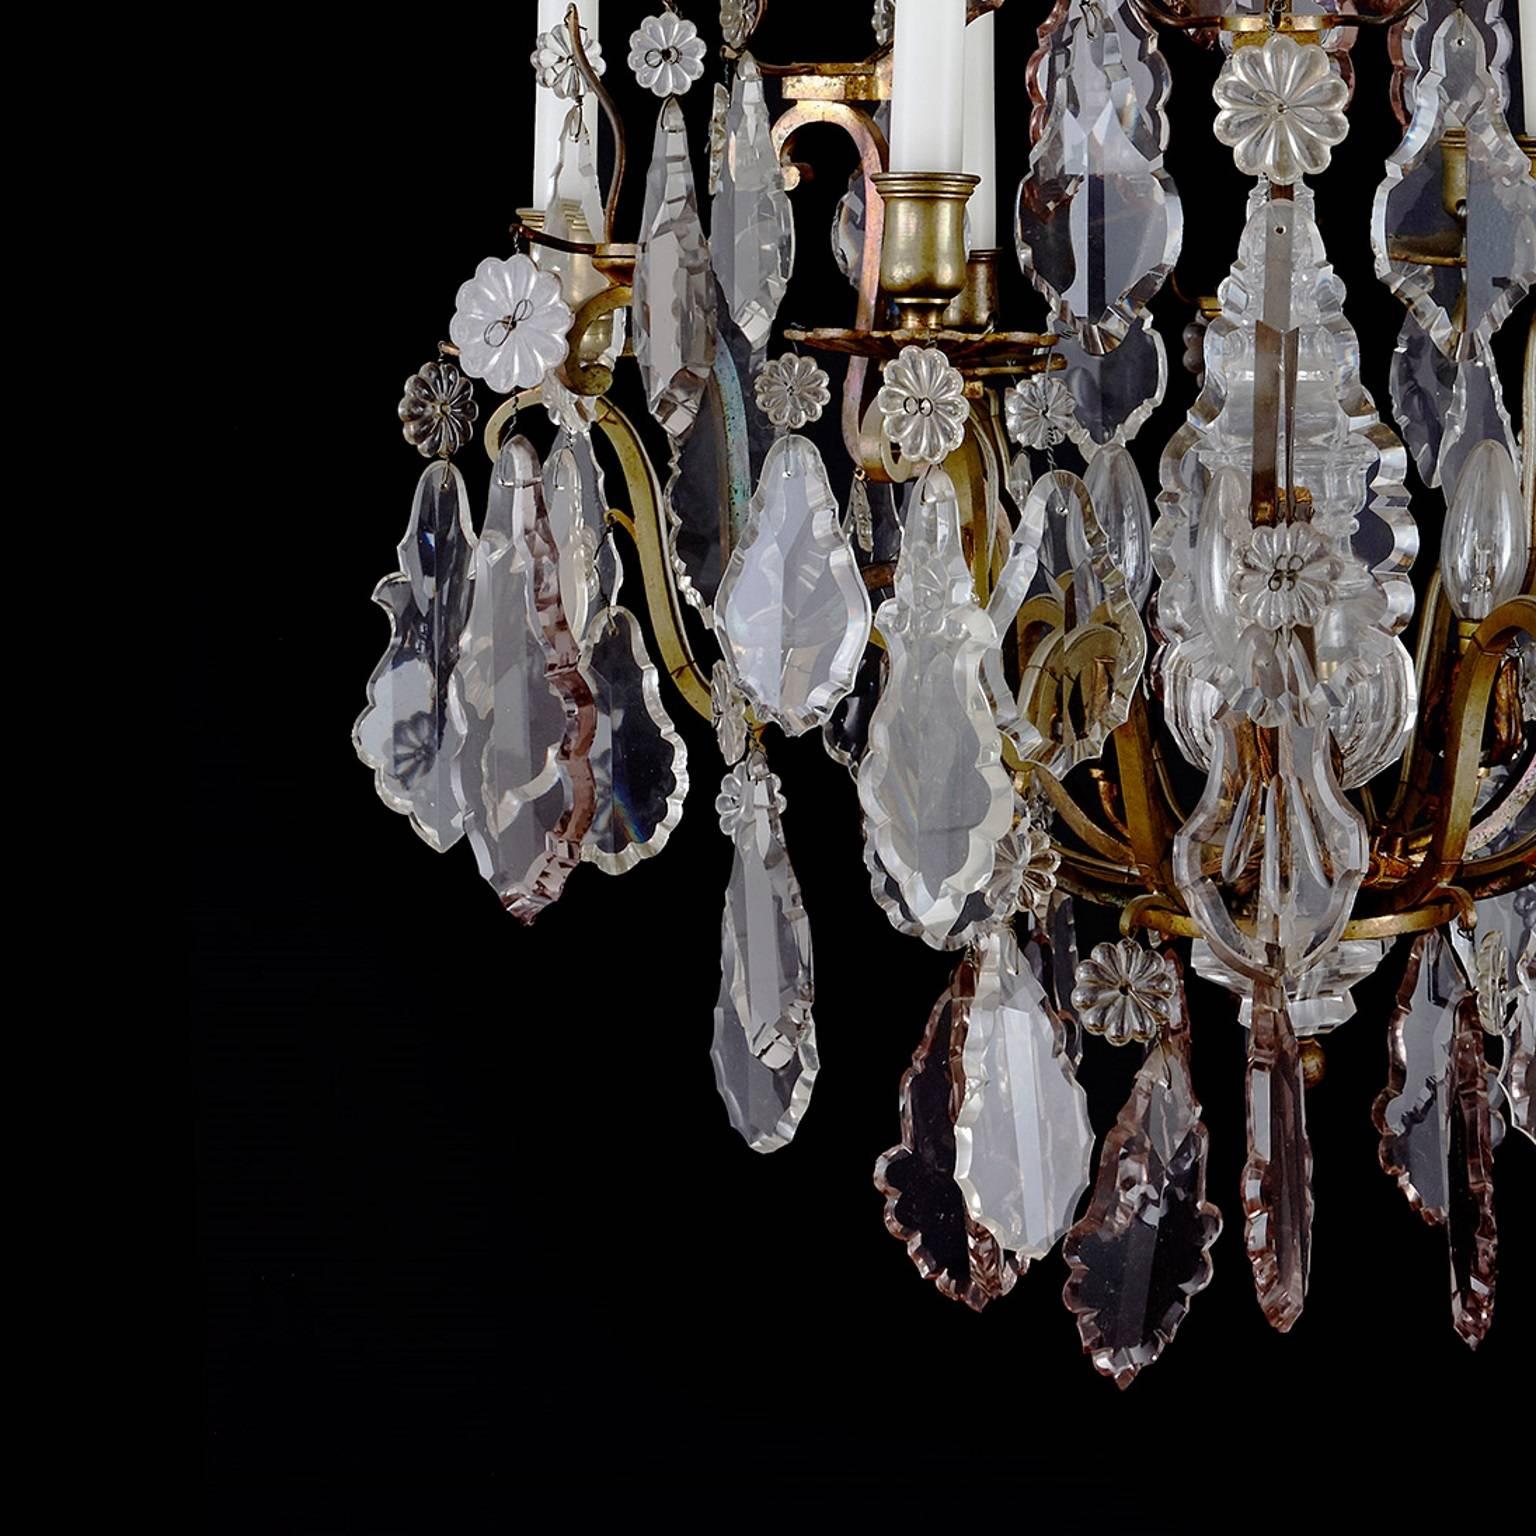 19th Century Ormolu and Cut Glass Antique Belle Époque Style French Six-Light Chandelier